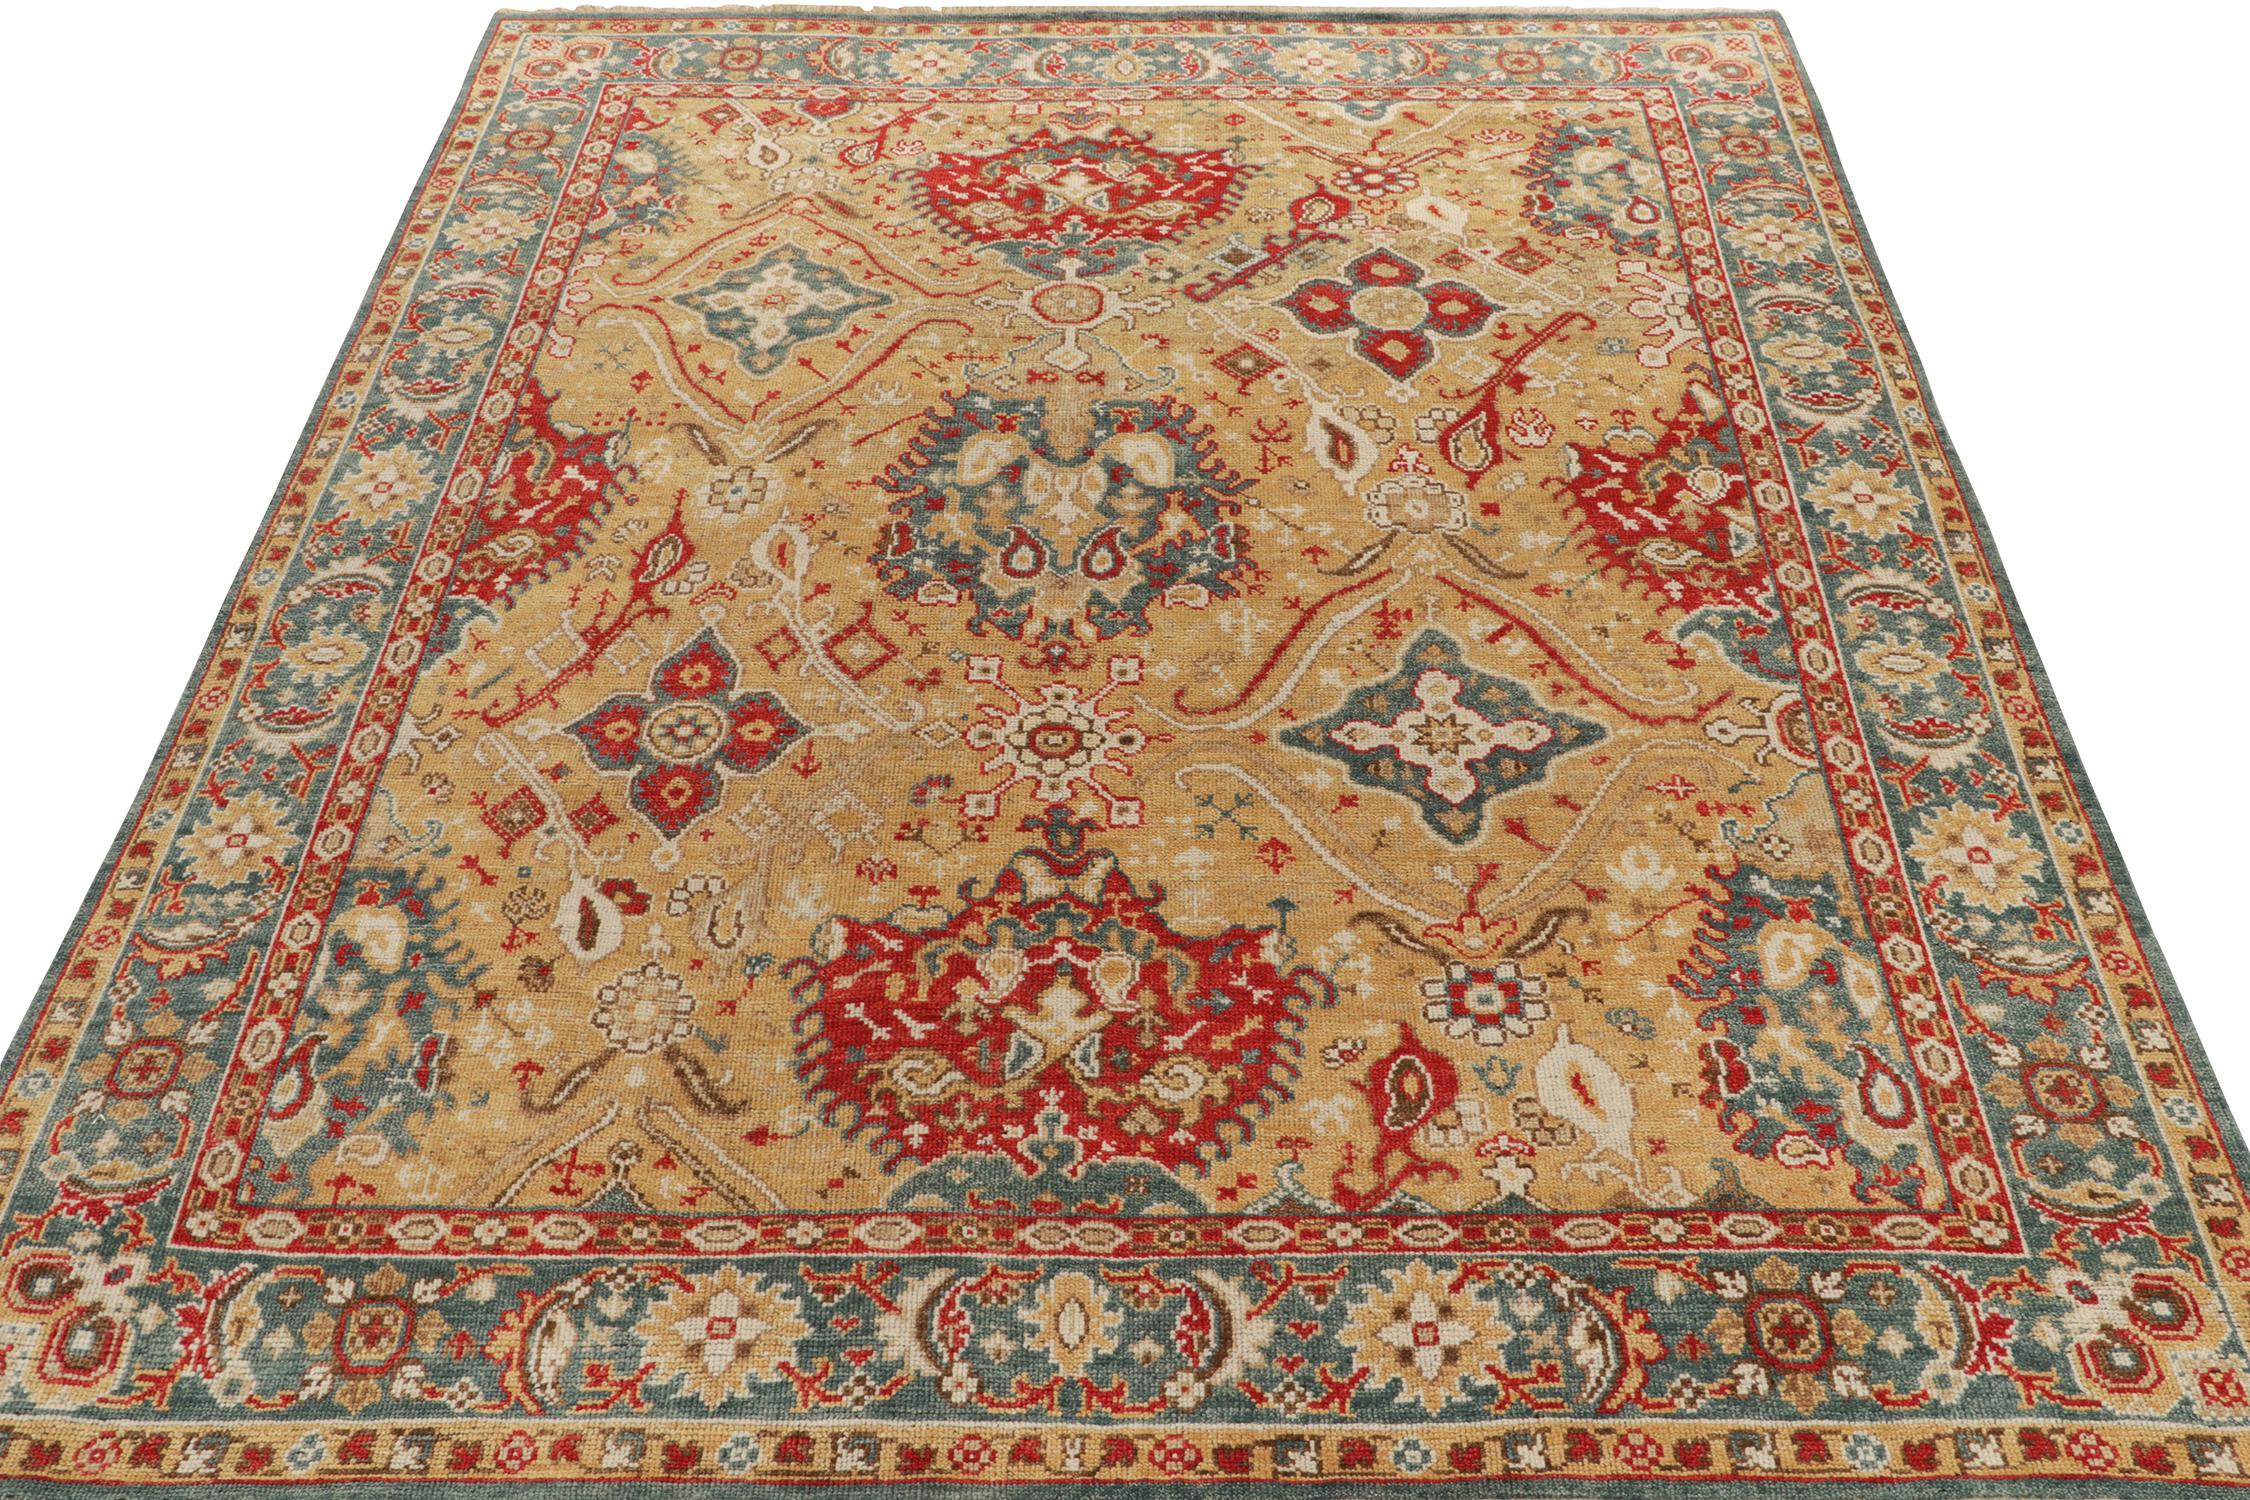 From our extensive Burano Collection, an 8x10 ode to 17th-century Oushak rugs in a delicious contemporary quality. Warm, melting notes of red, soothing blue and white accent border and field floral patterns against a soothing beige-brown background.